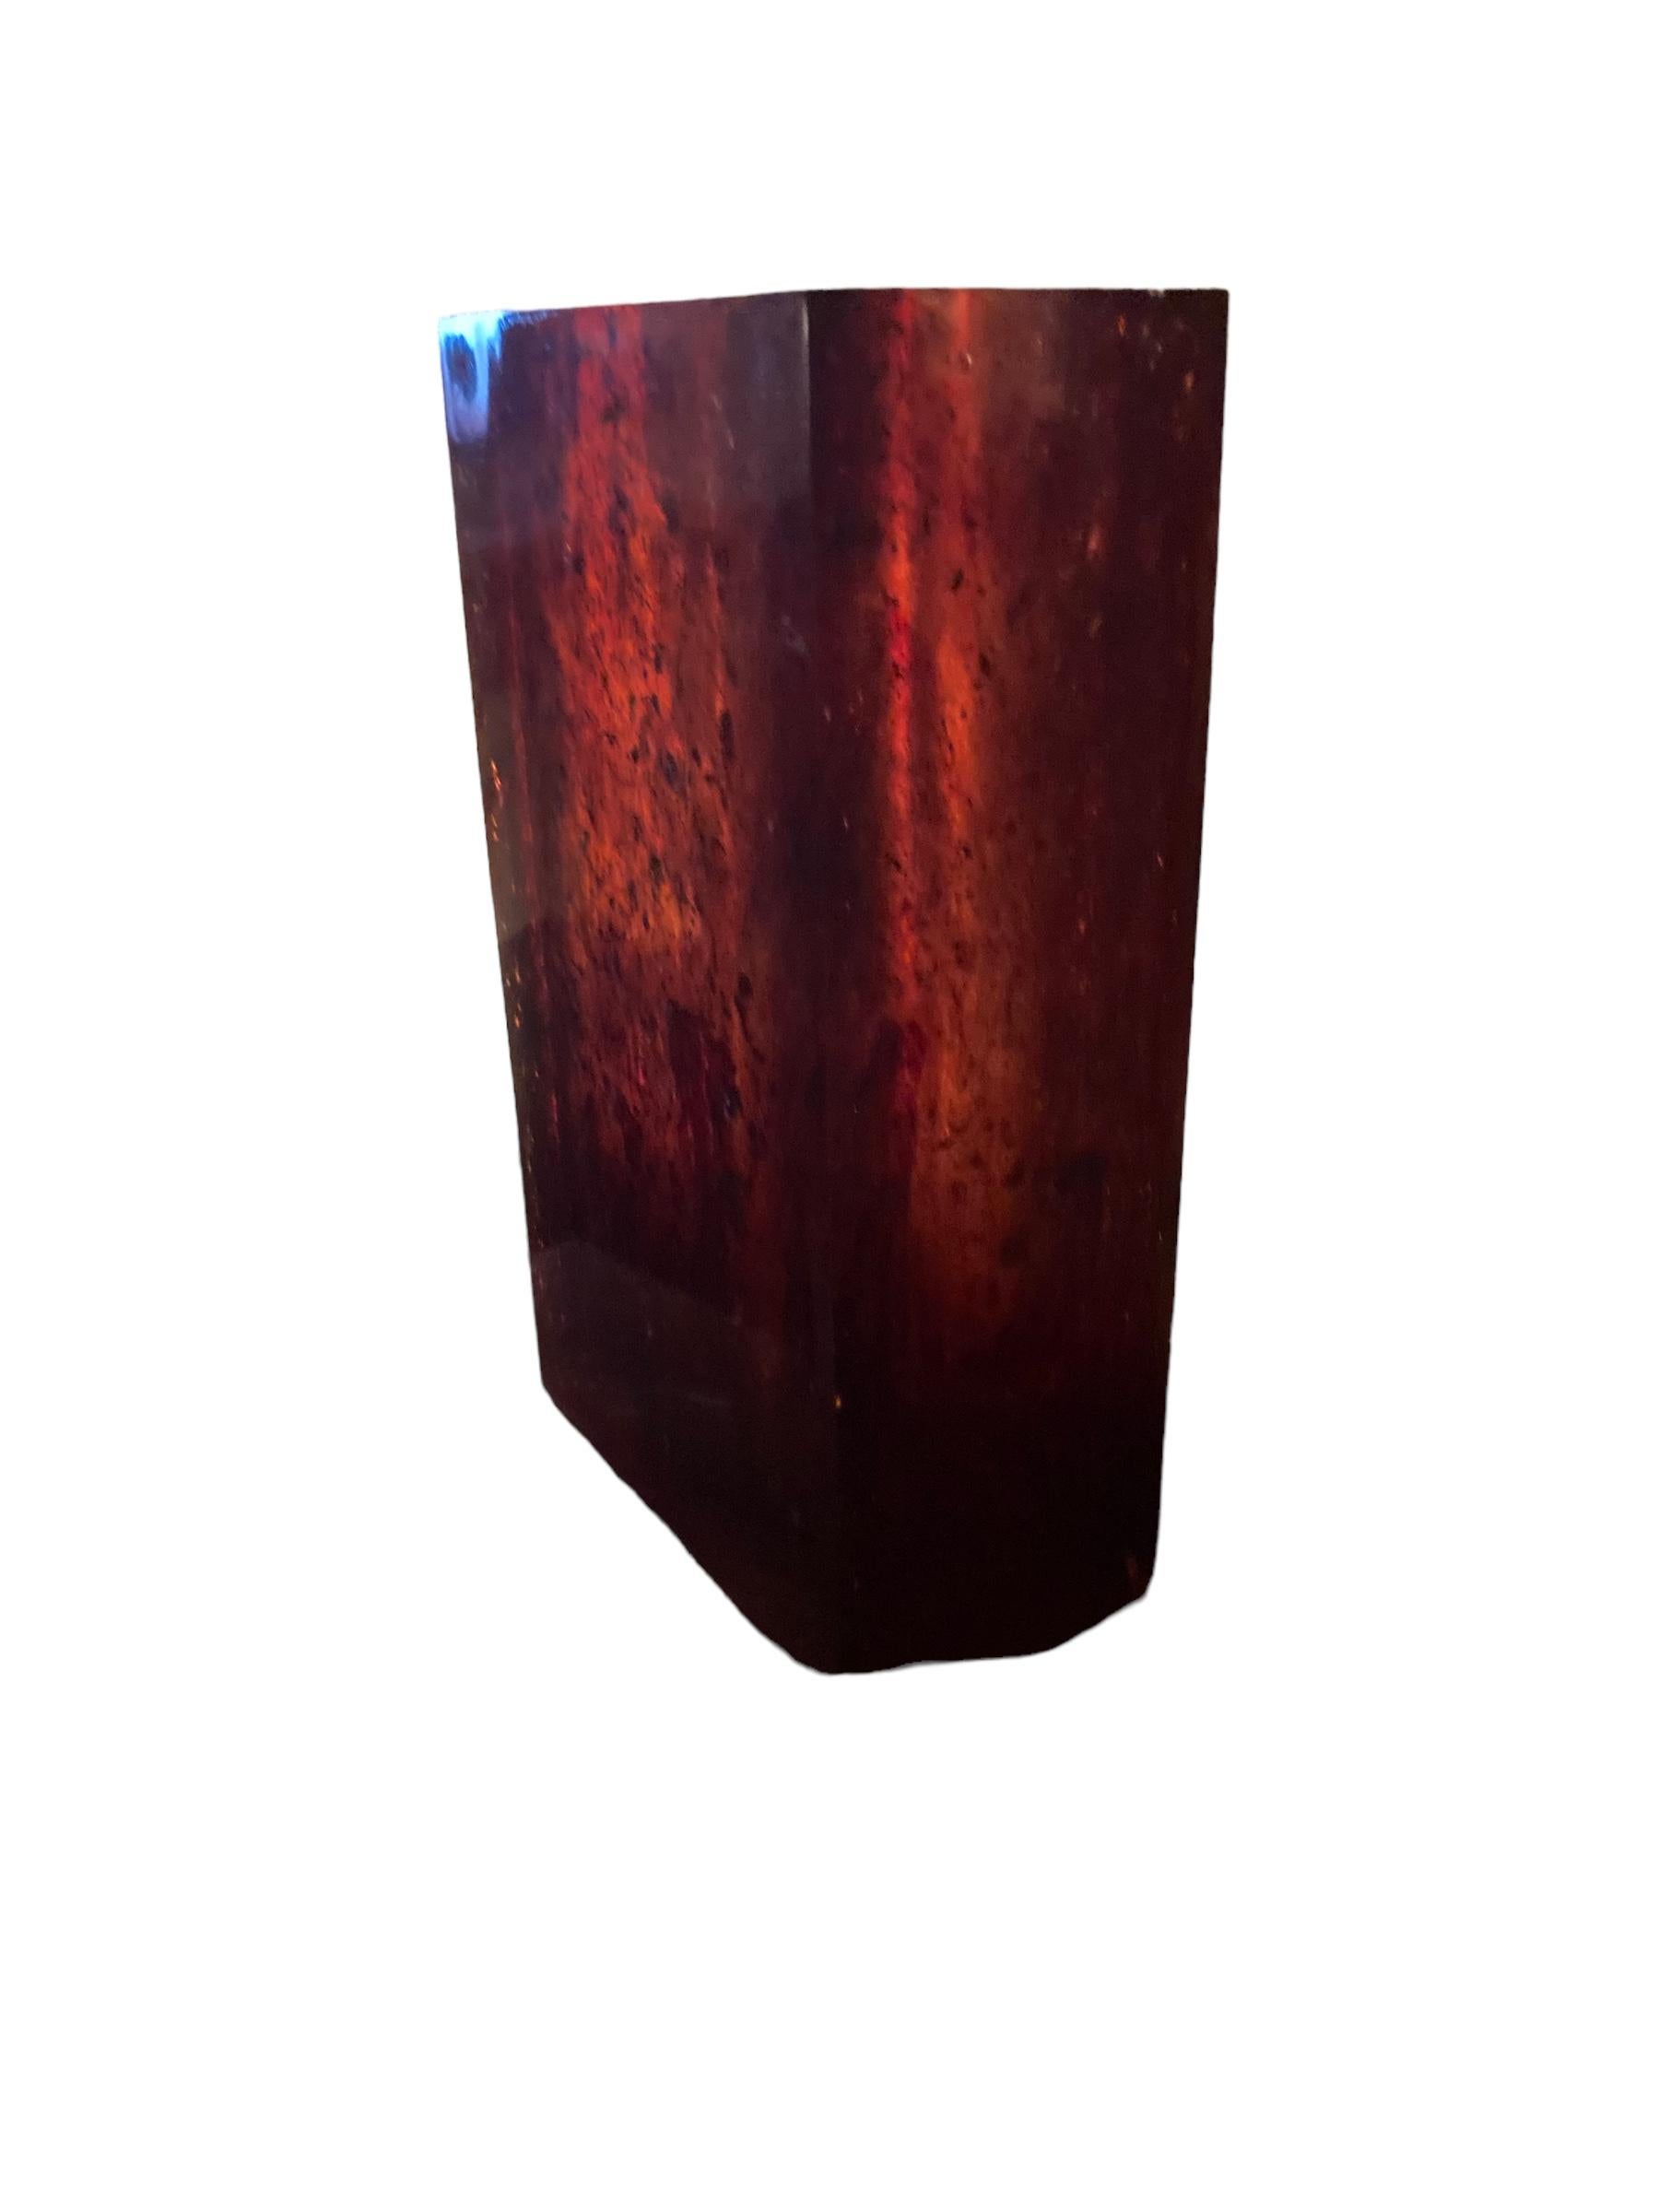 A Vintage Amber coloured Rectangualr Vase from Paris, made from resin this can be used as a vase, wine cooler or decorative object. In the style of Marther Sturdy this fits in with Mid Century or any other vintage room design.

H: 41 cm

W: 25